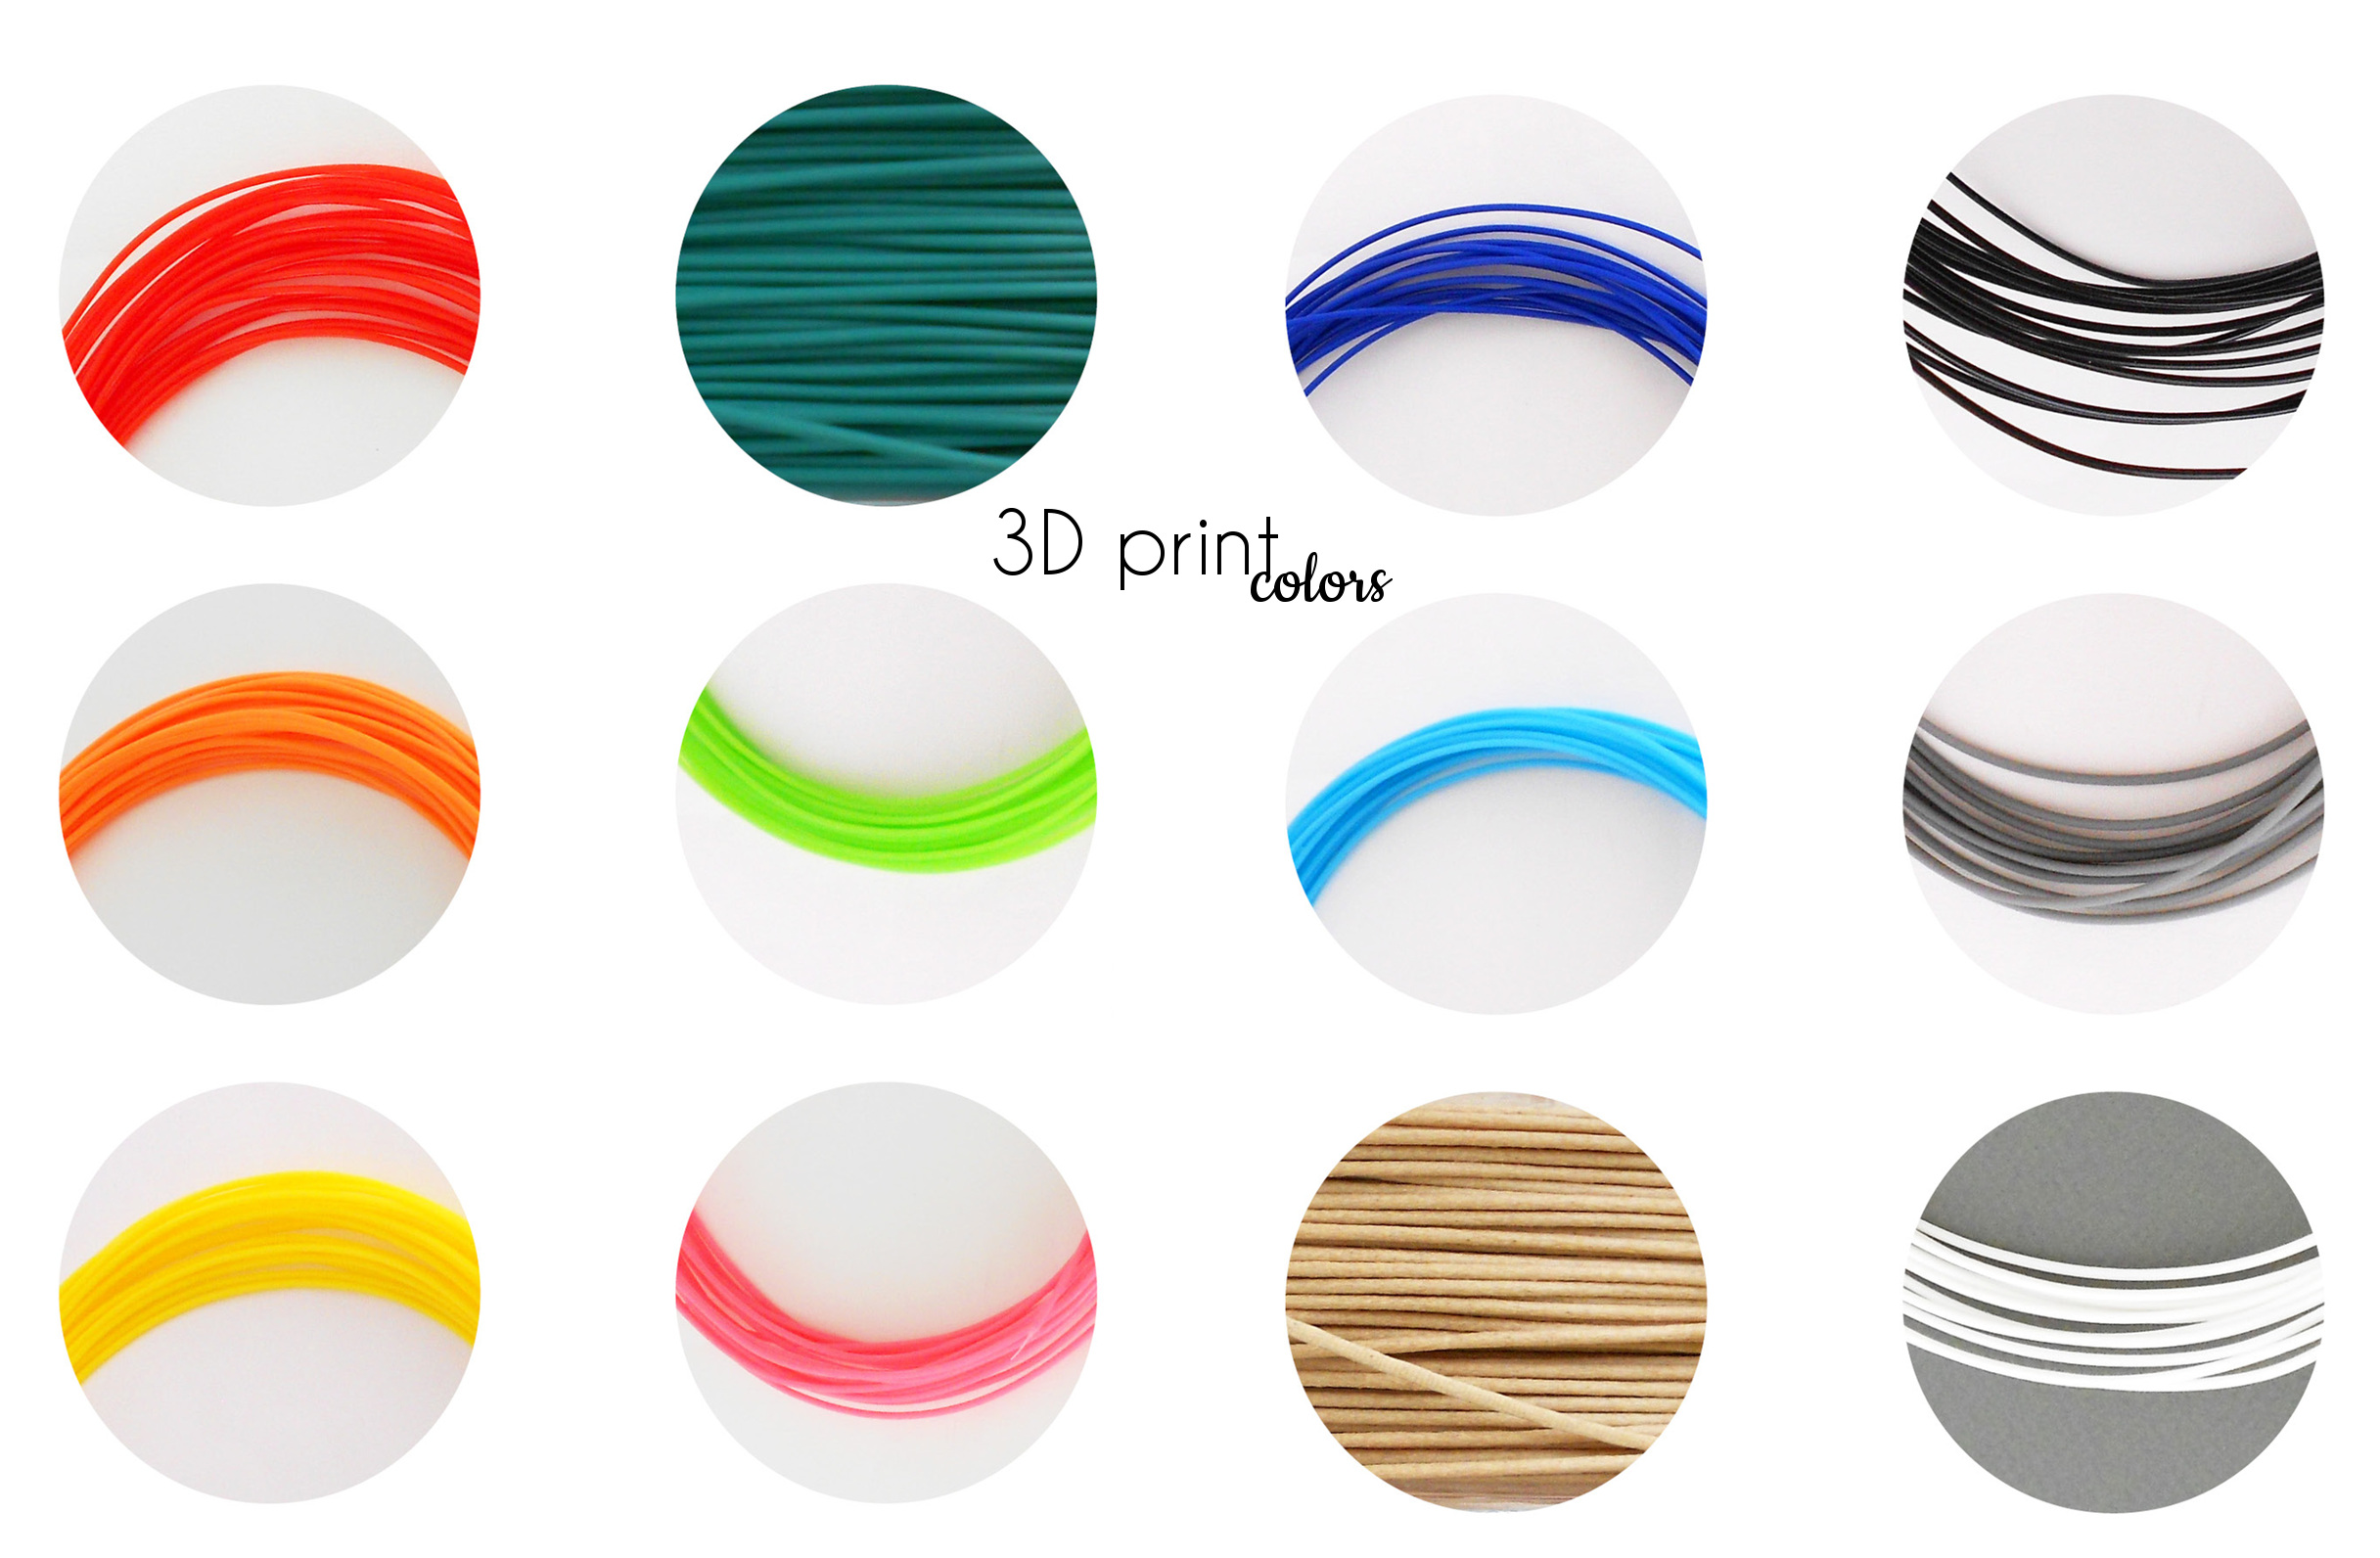 3D printed jewelry colors